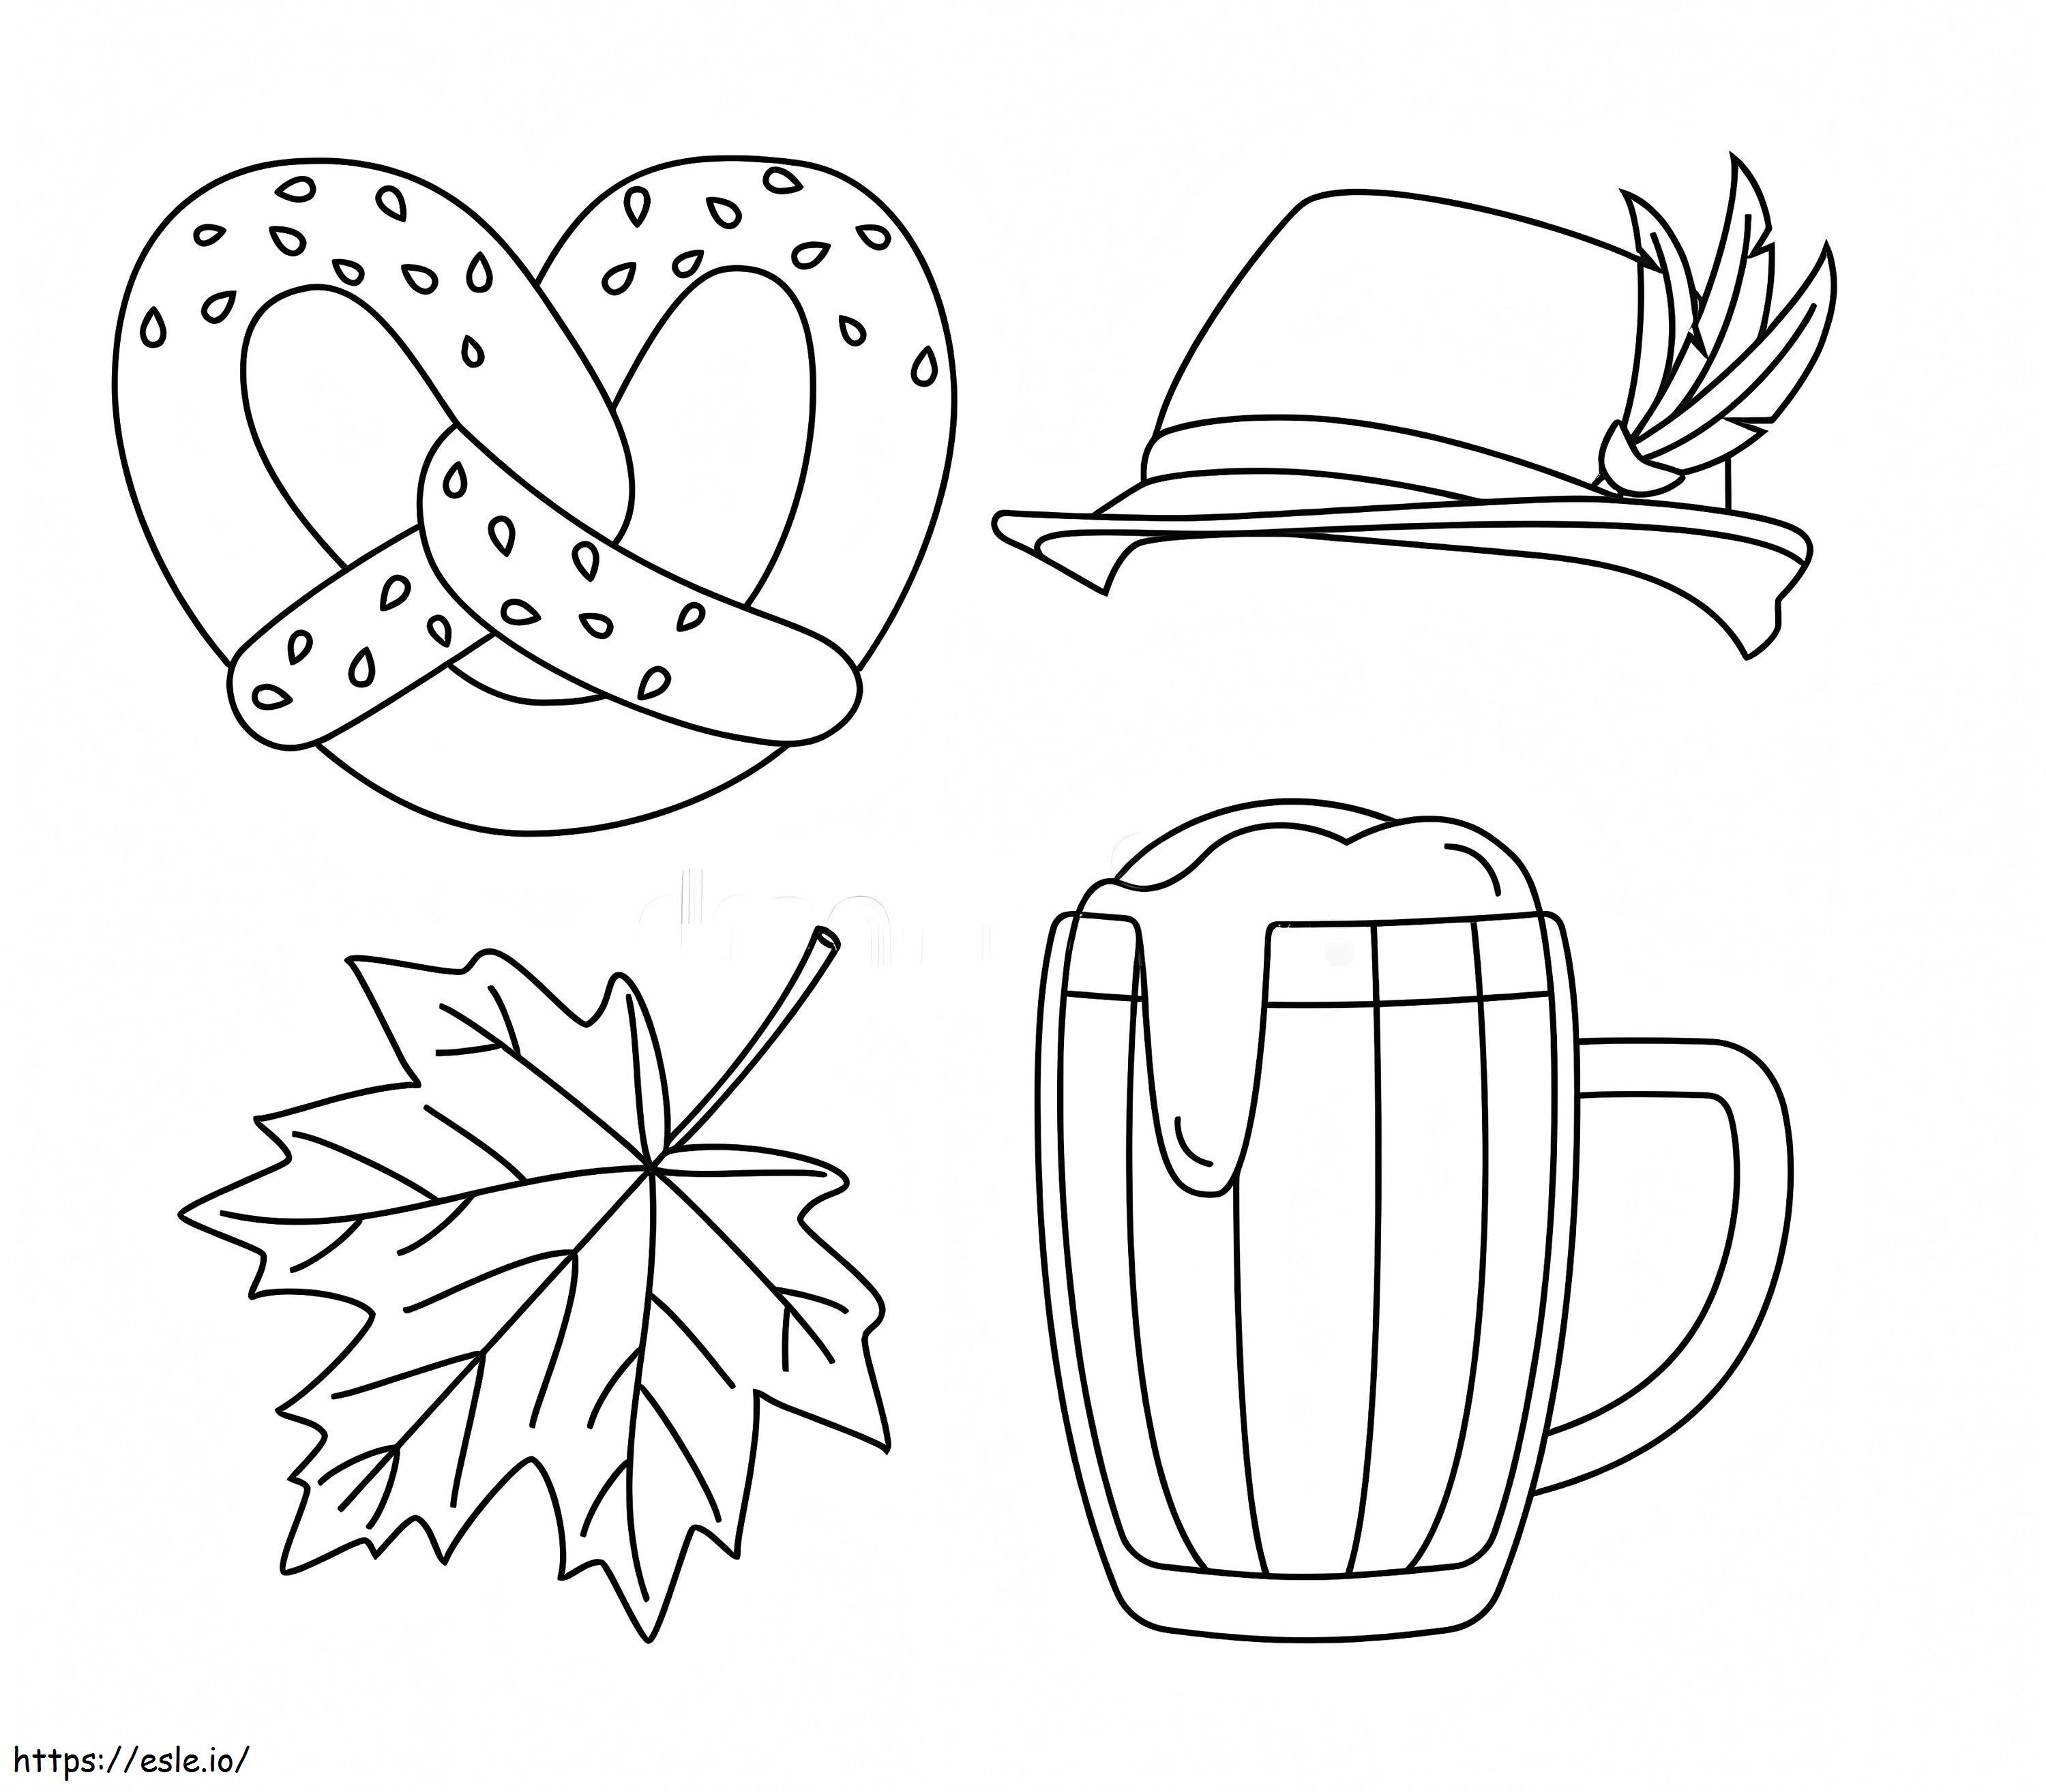 Oktoberfest 11 coloring page